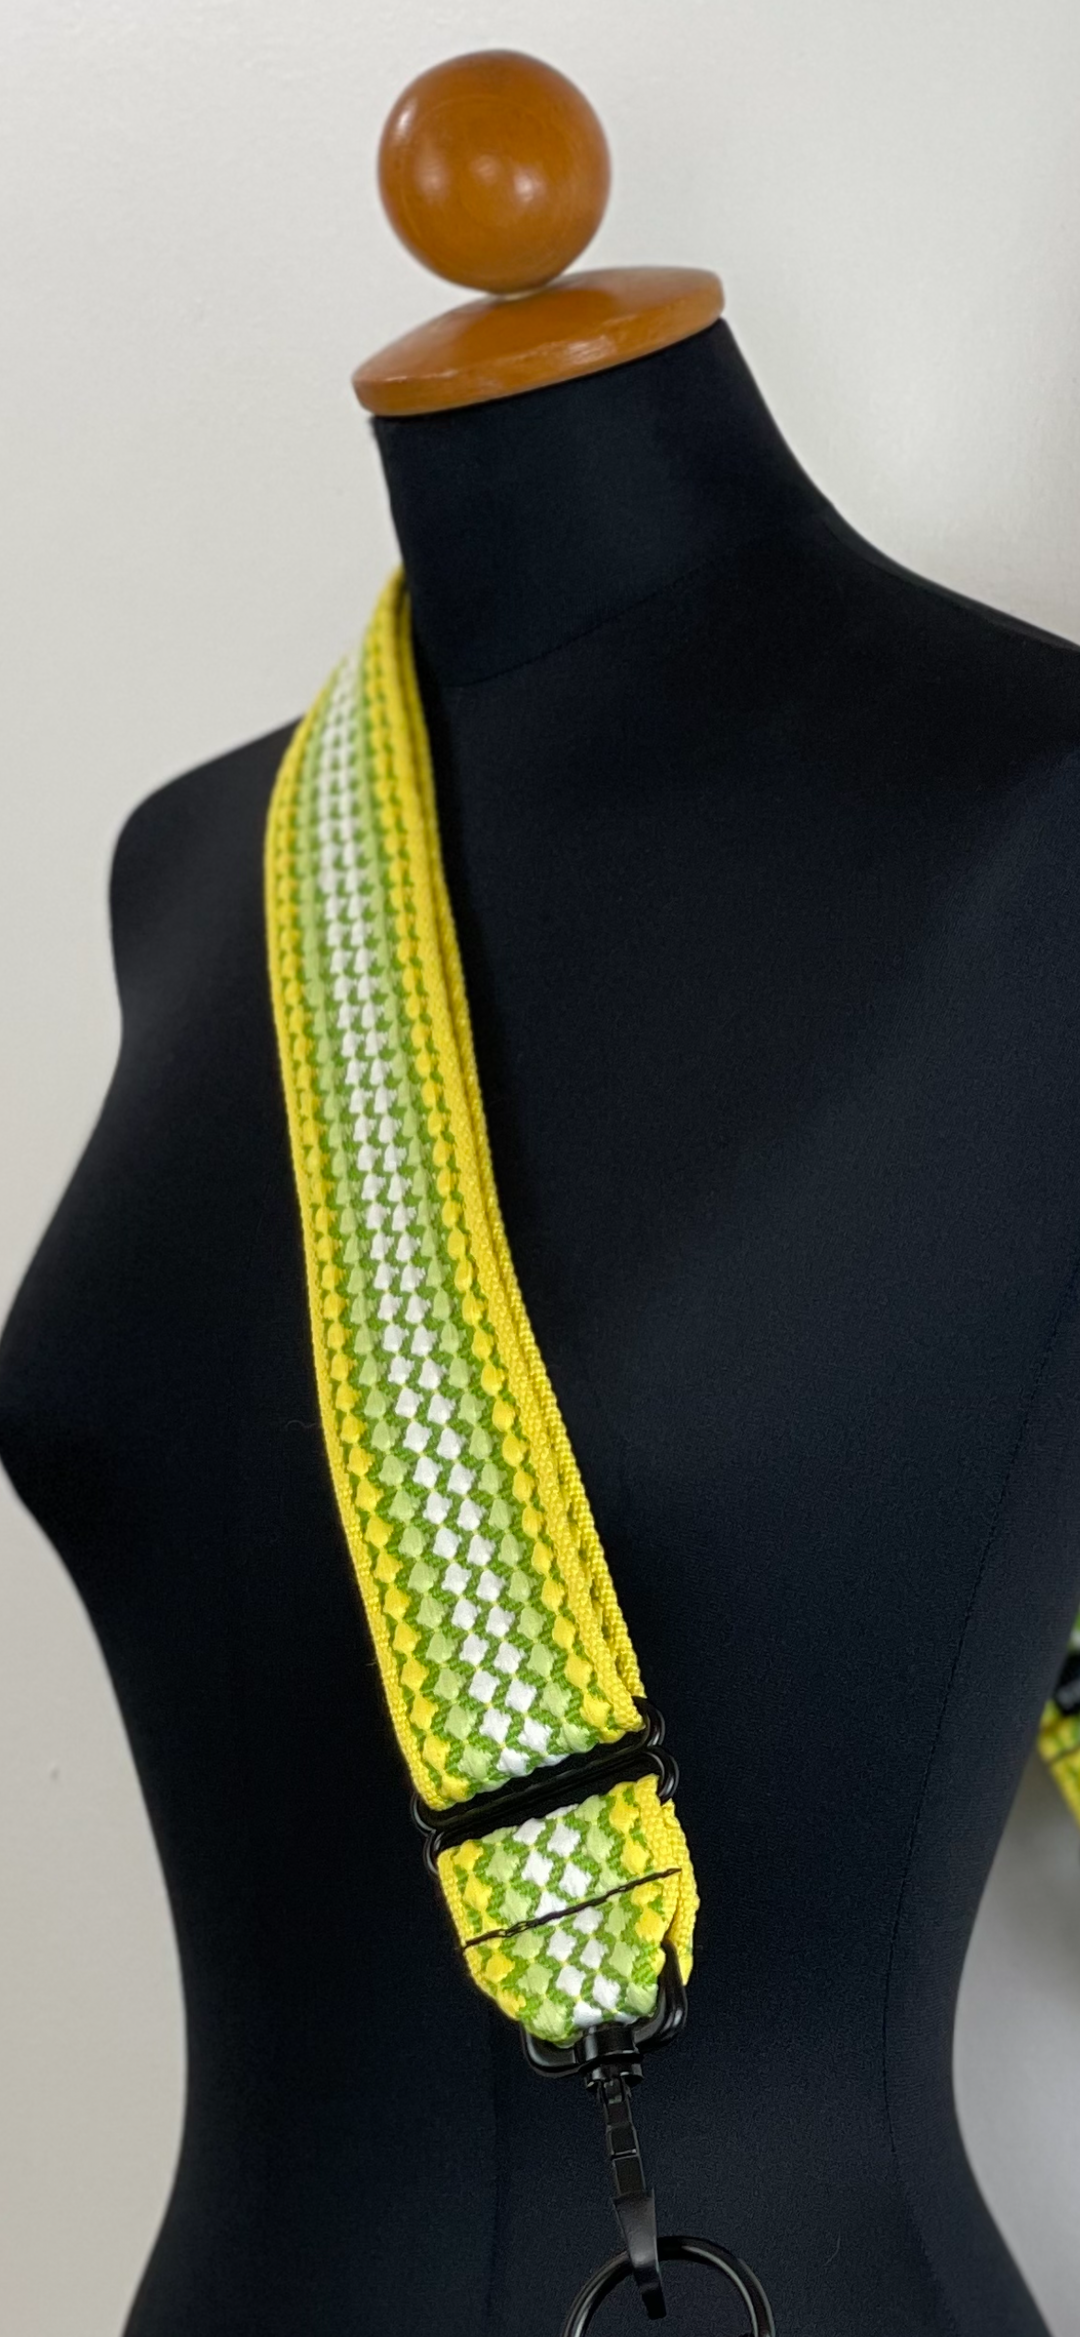 Yellow green 2 inch Crossbody Wide Shoulder Straps. Mustkies Replacement Adjustable Purse Straps are a next MUSt have.  Easy snap on and off and adds a POP to your bag. Adjustable Guitar Straps for Handbags.  Adjustable Guitar Straps for Handbags transforms your bags.   Transform Your Bag by updating and customizing it with Mustkies  crossbody wide shoulder webbing straps. 1 1/2  or 2 Inches wide with Black Metal Hardware.